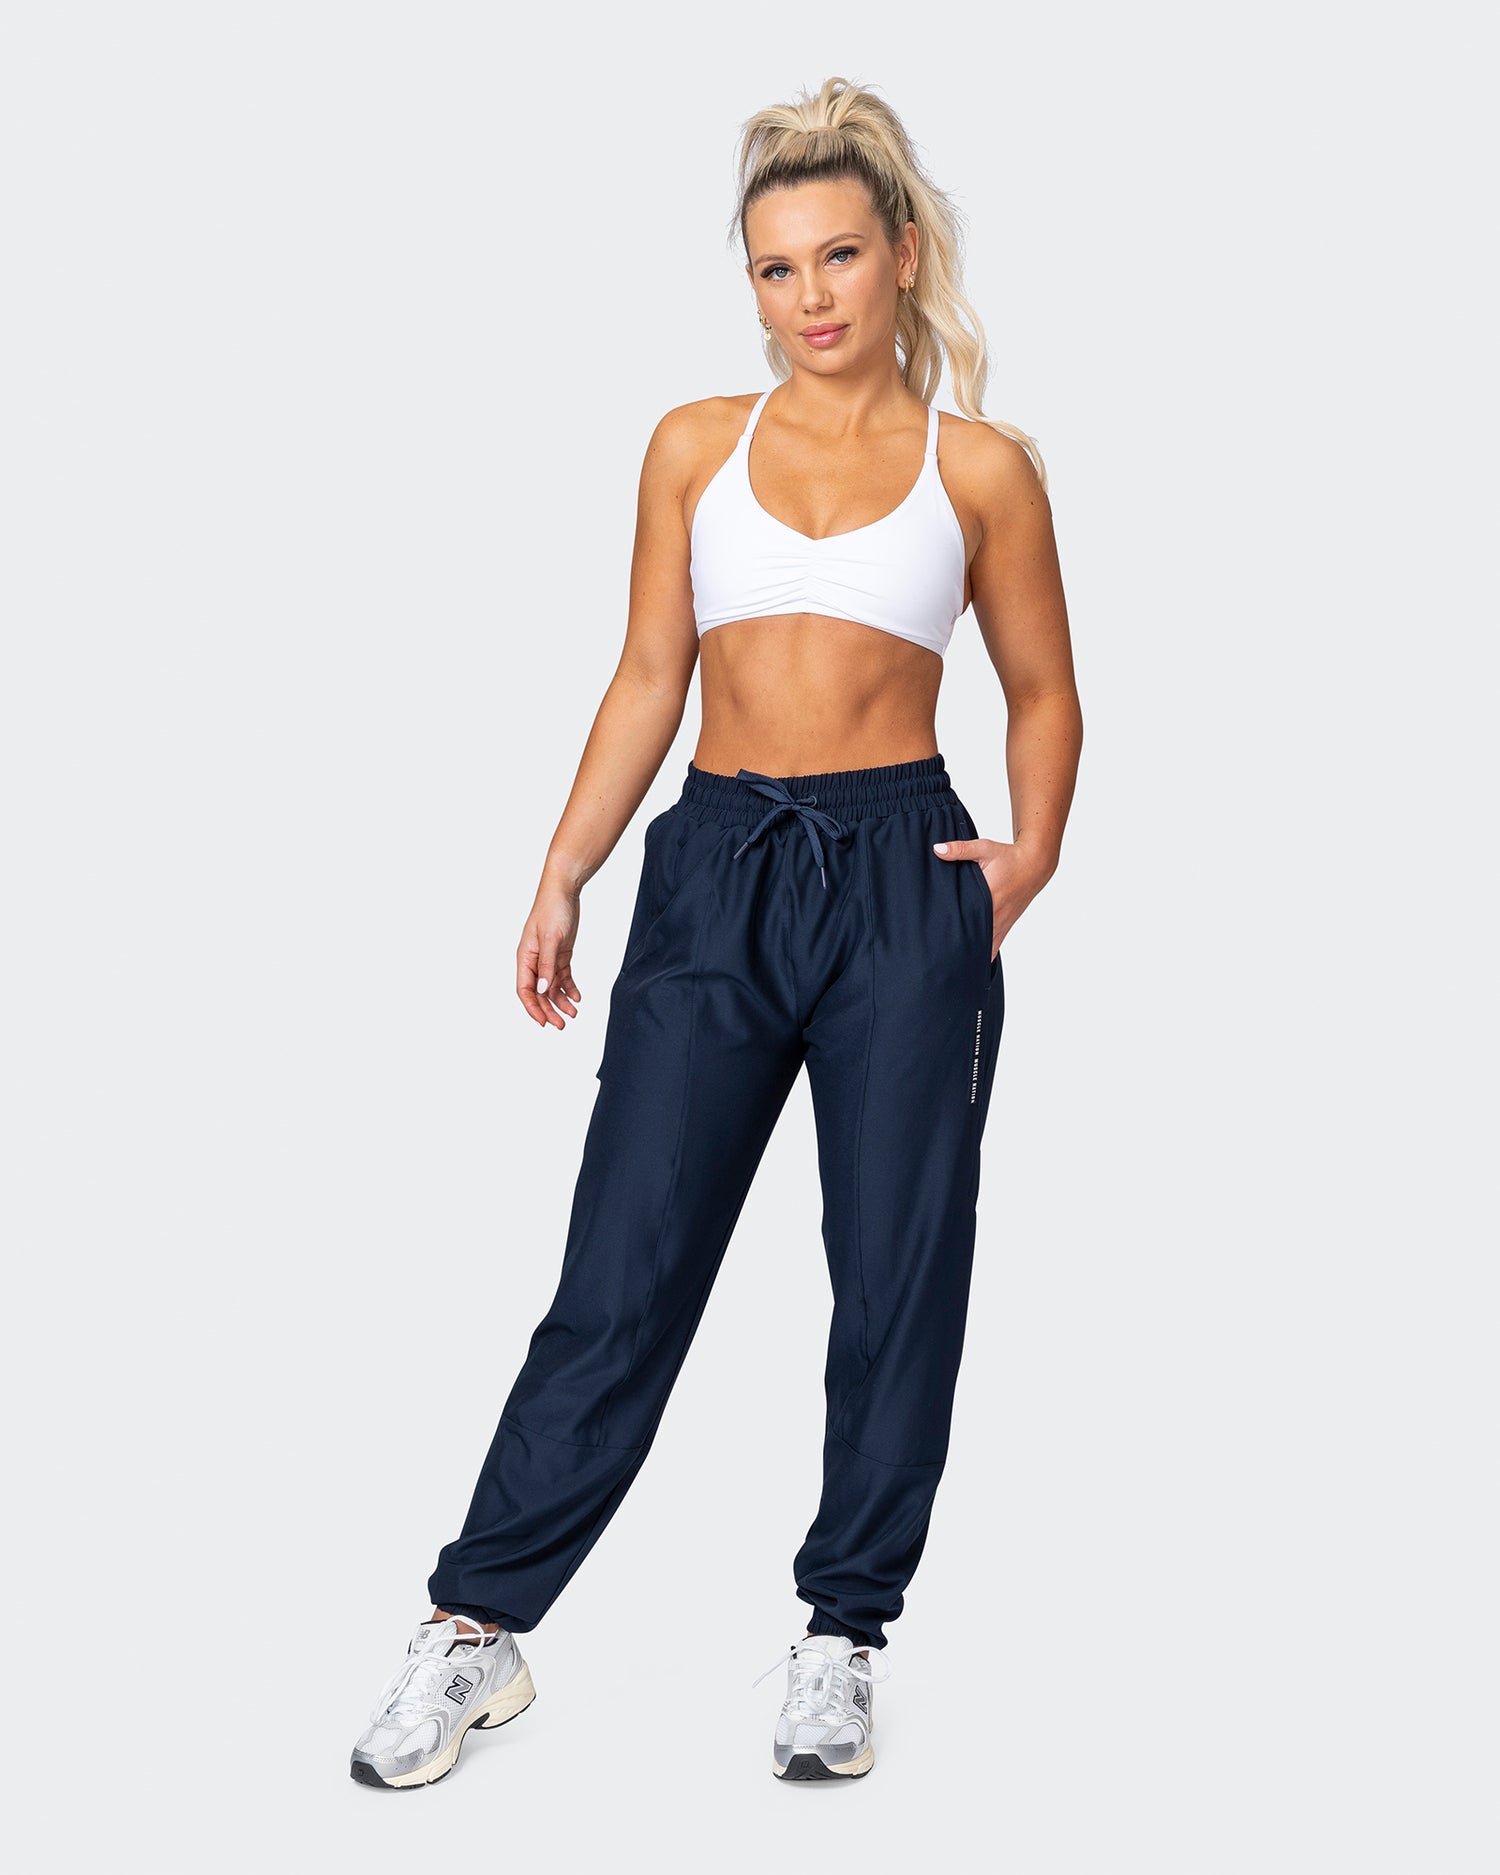 Womens Dynamic Lightweight Joggers - Odyssey - Muscle Nation